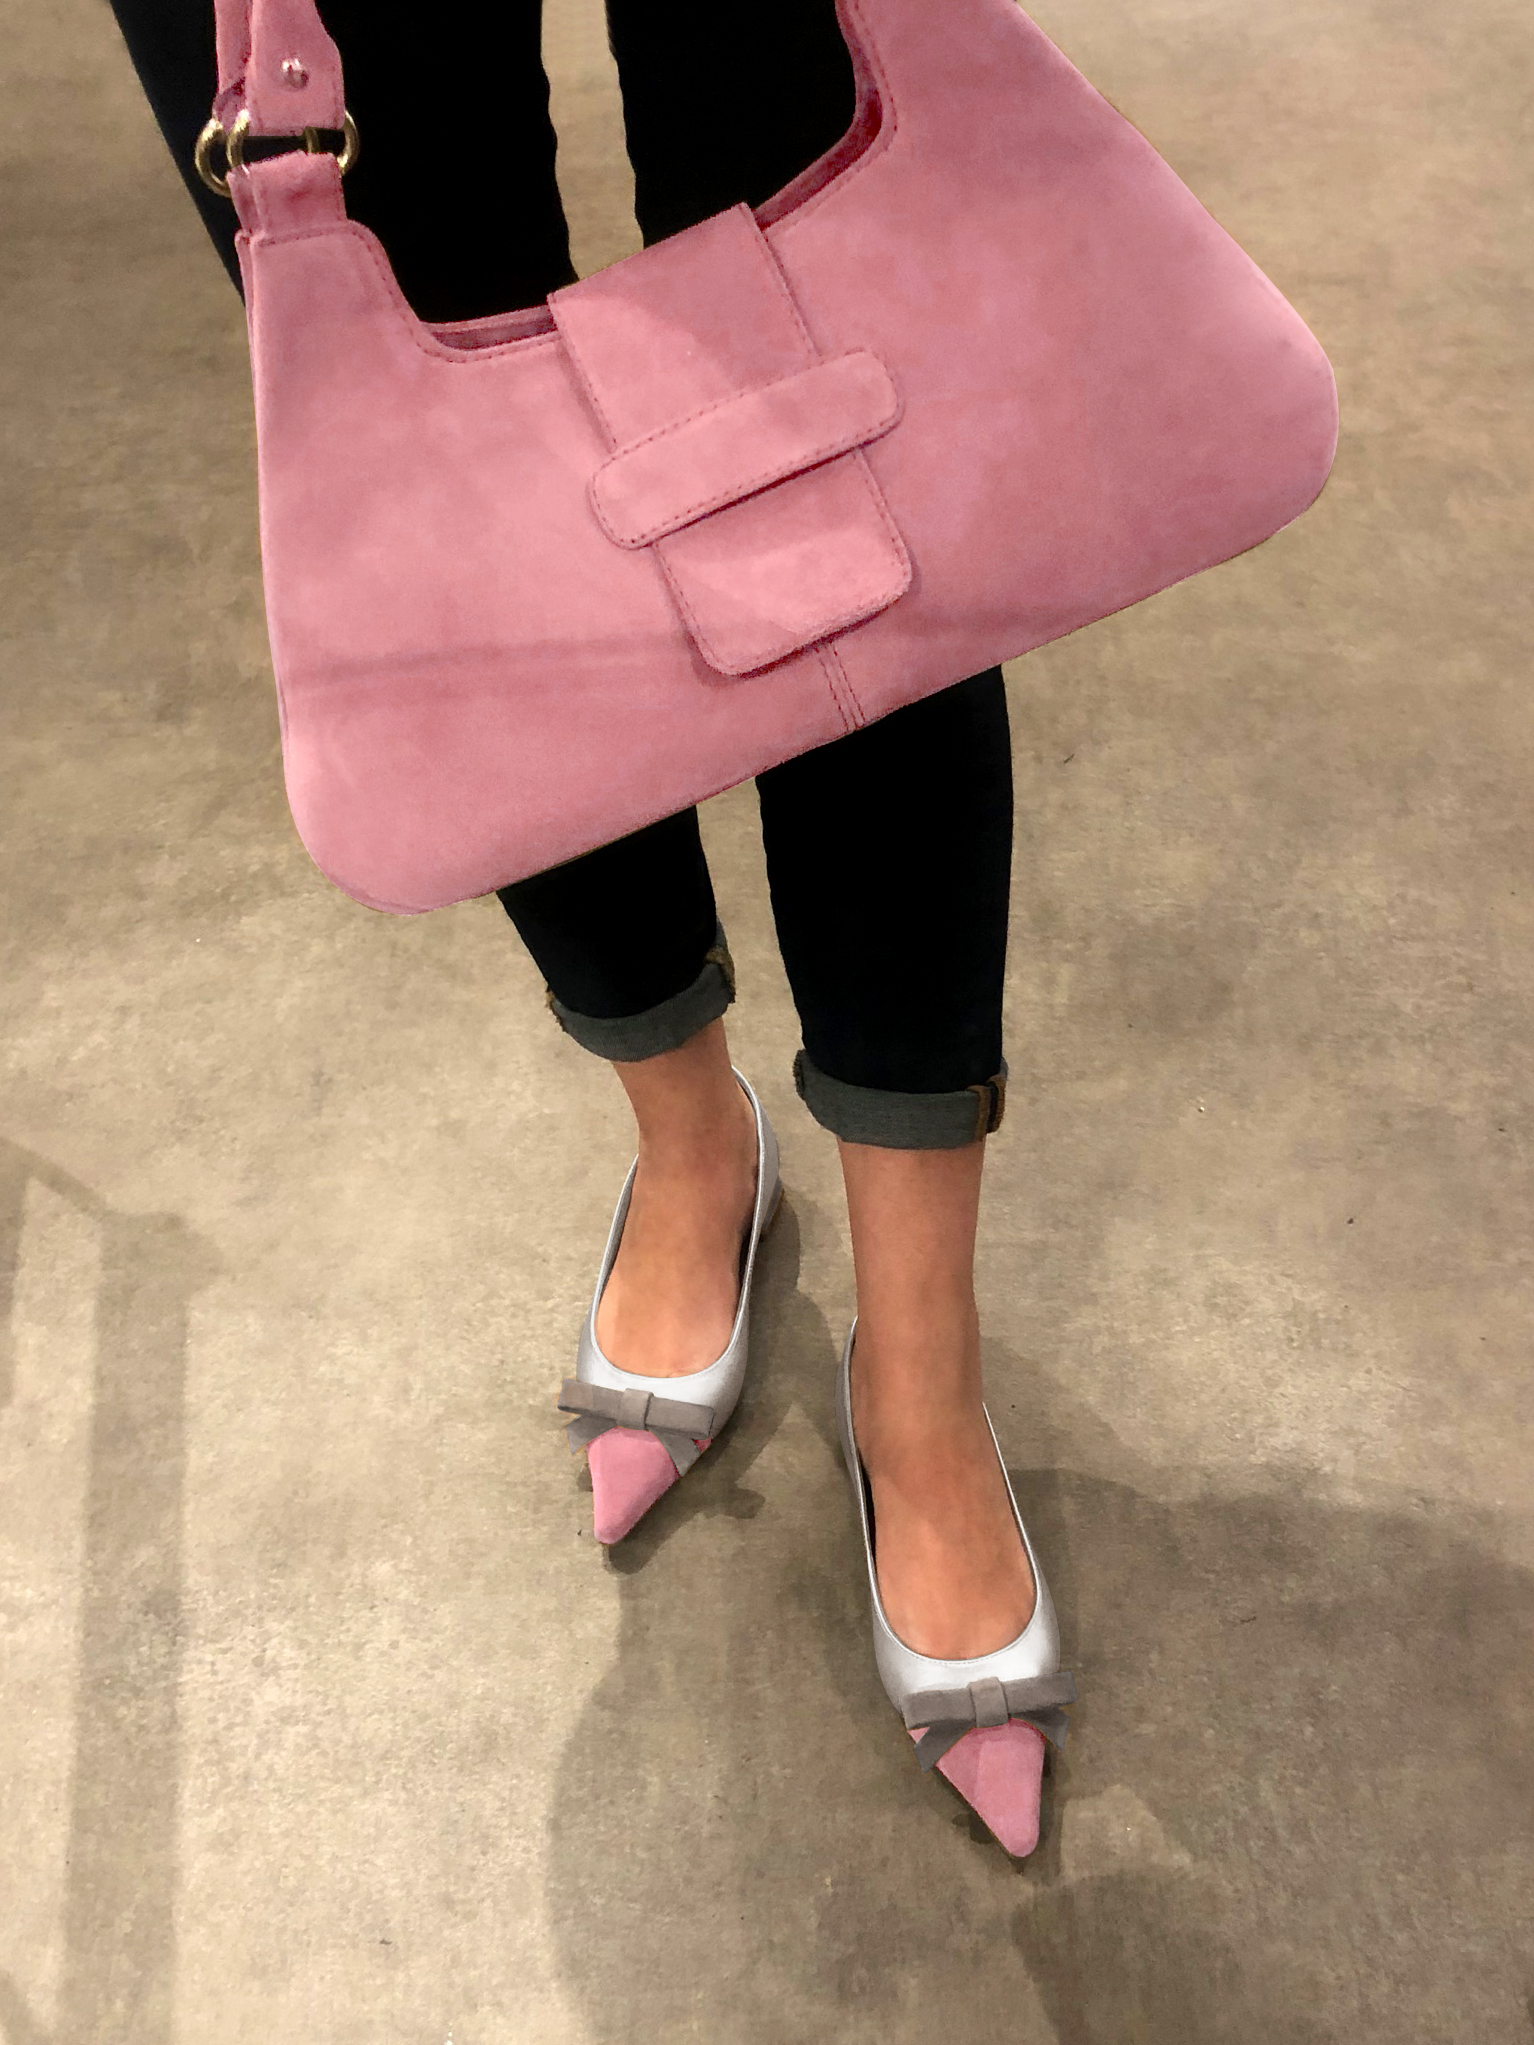 Carnation pink, light silver and pebble grey women's ballet pumps, with low heels. Pointed toe. Flat flare heels. Worn view - Florence KOOIJMAN